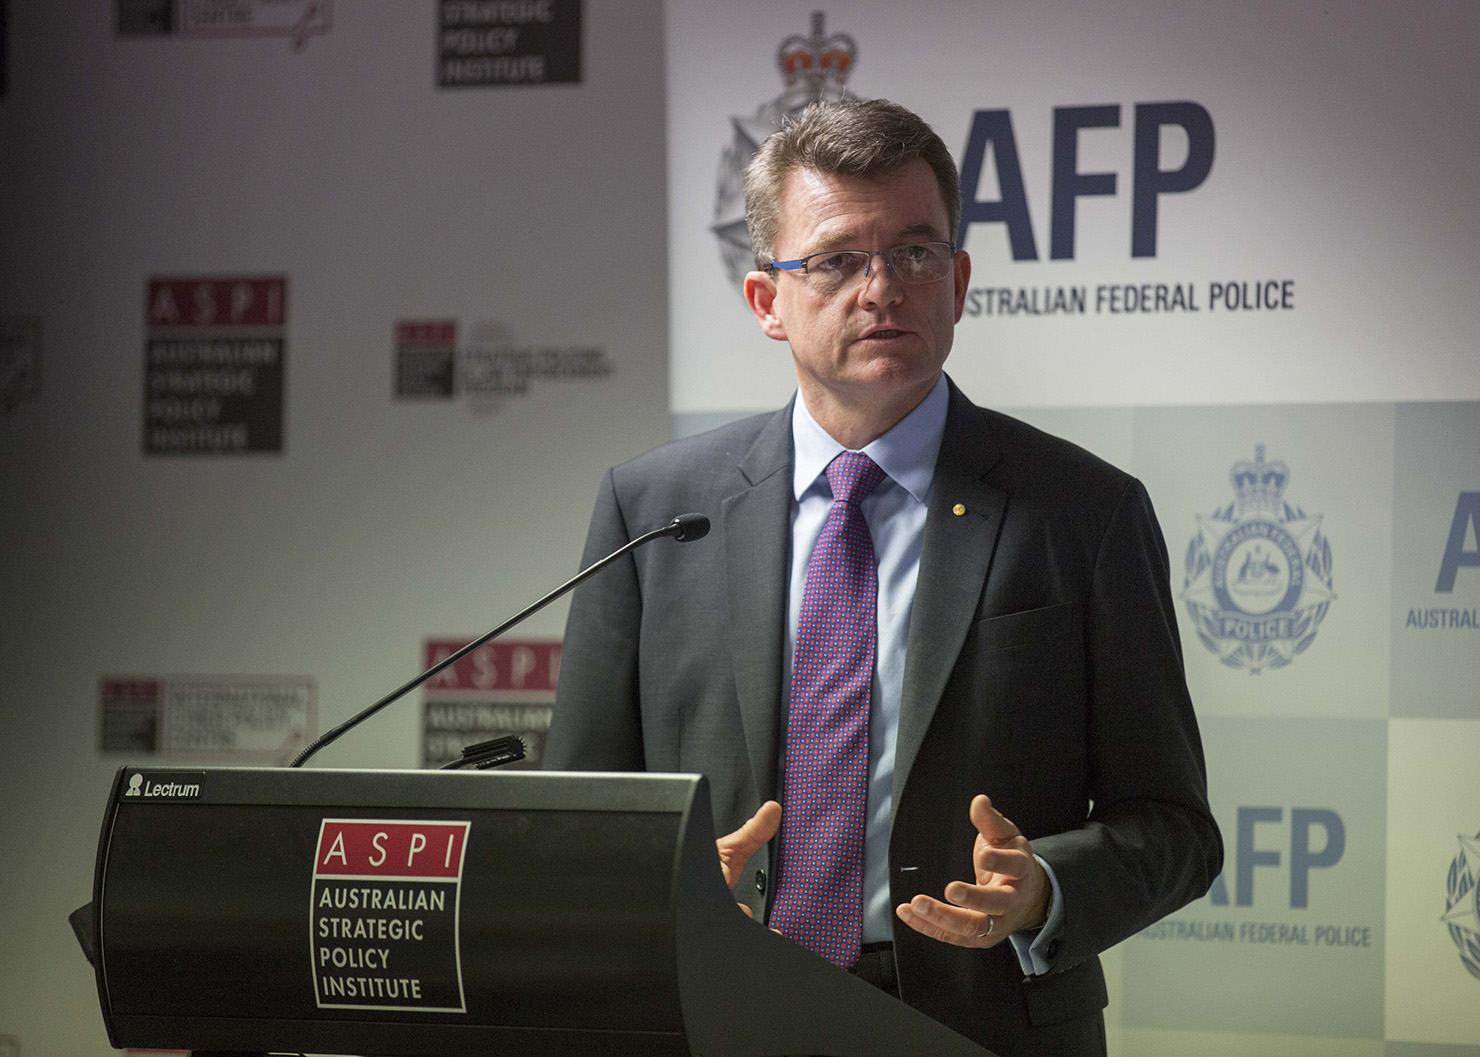 The AFP Commissioner speaking at a lecturn